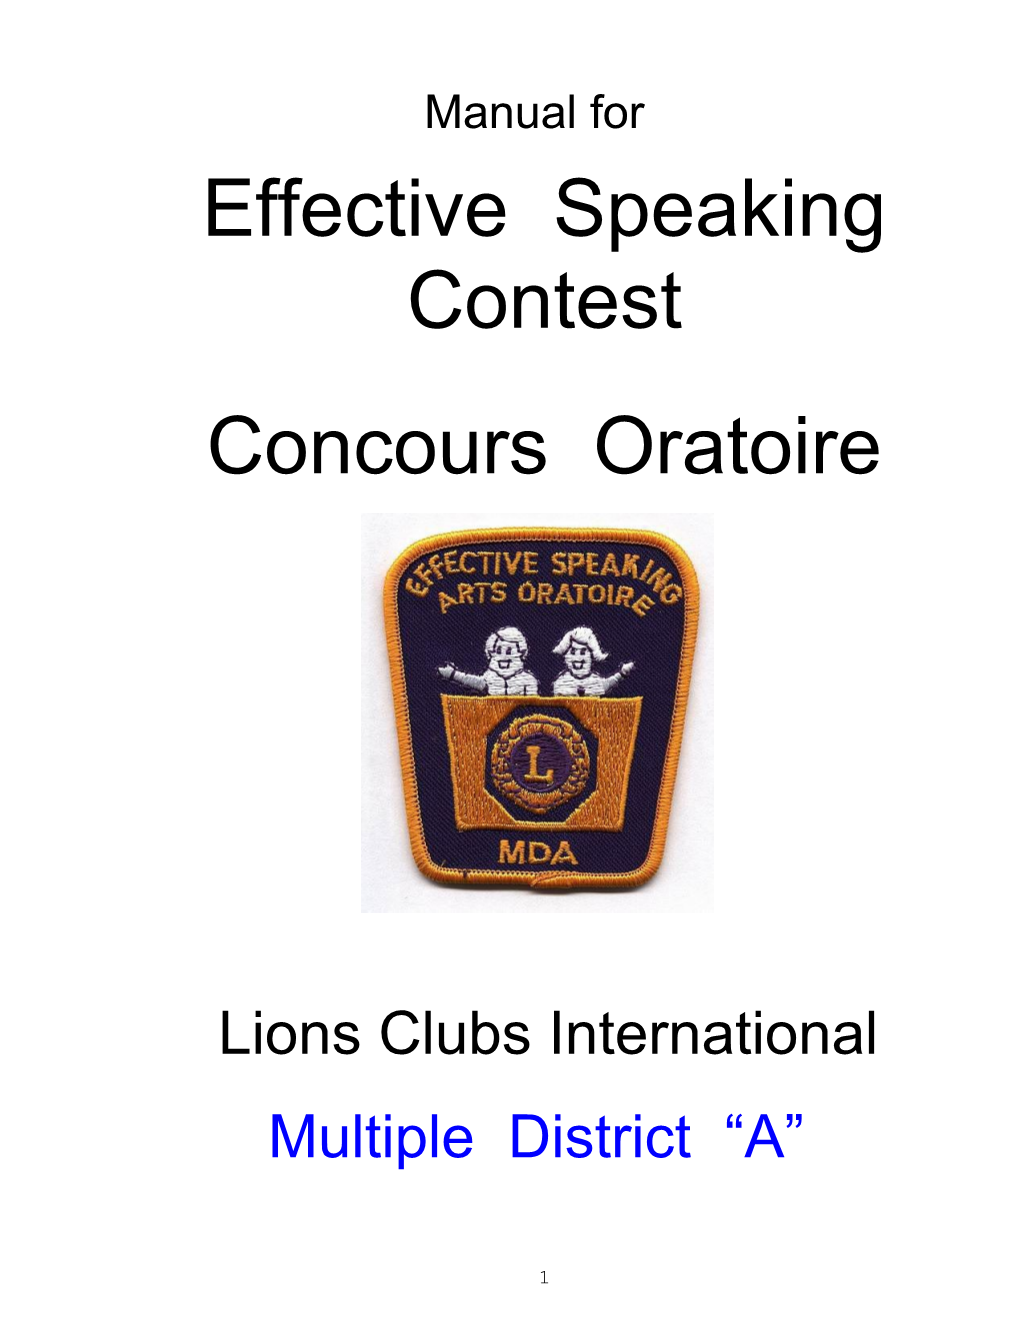 Effective Speaking Contest Manual